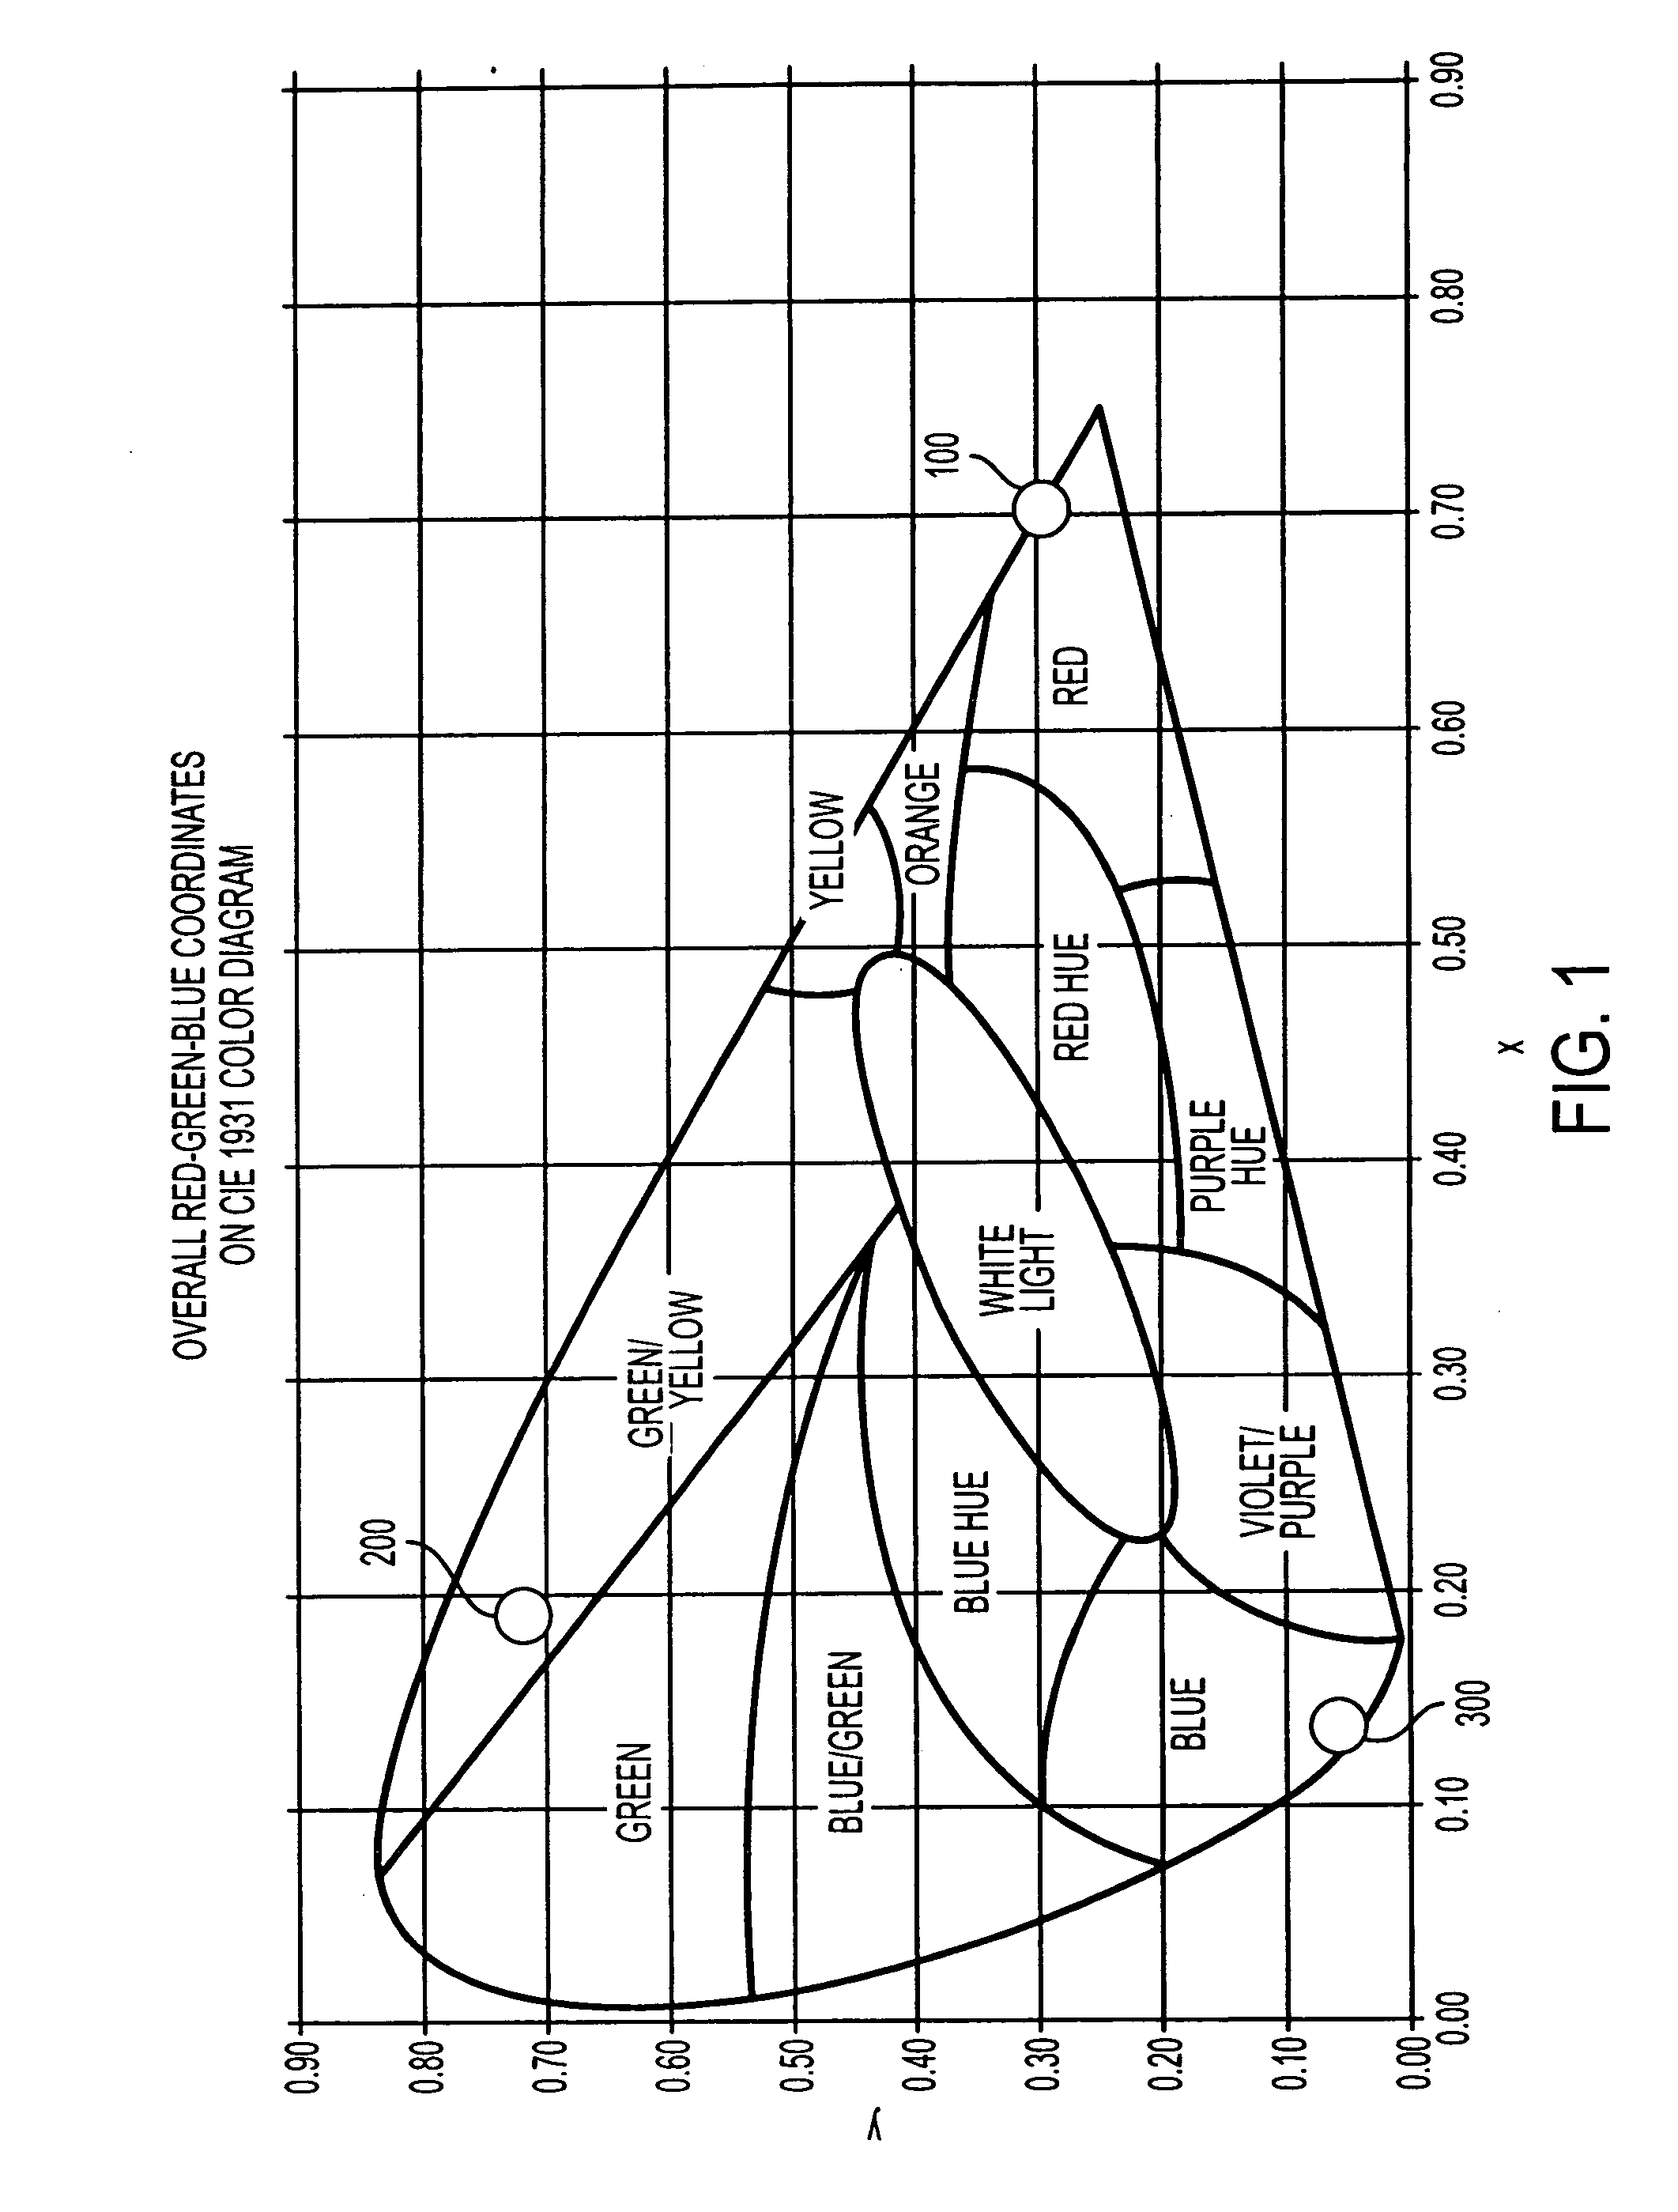 Method and apparatus for storing and defining light shows